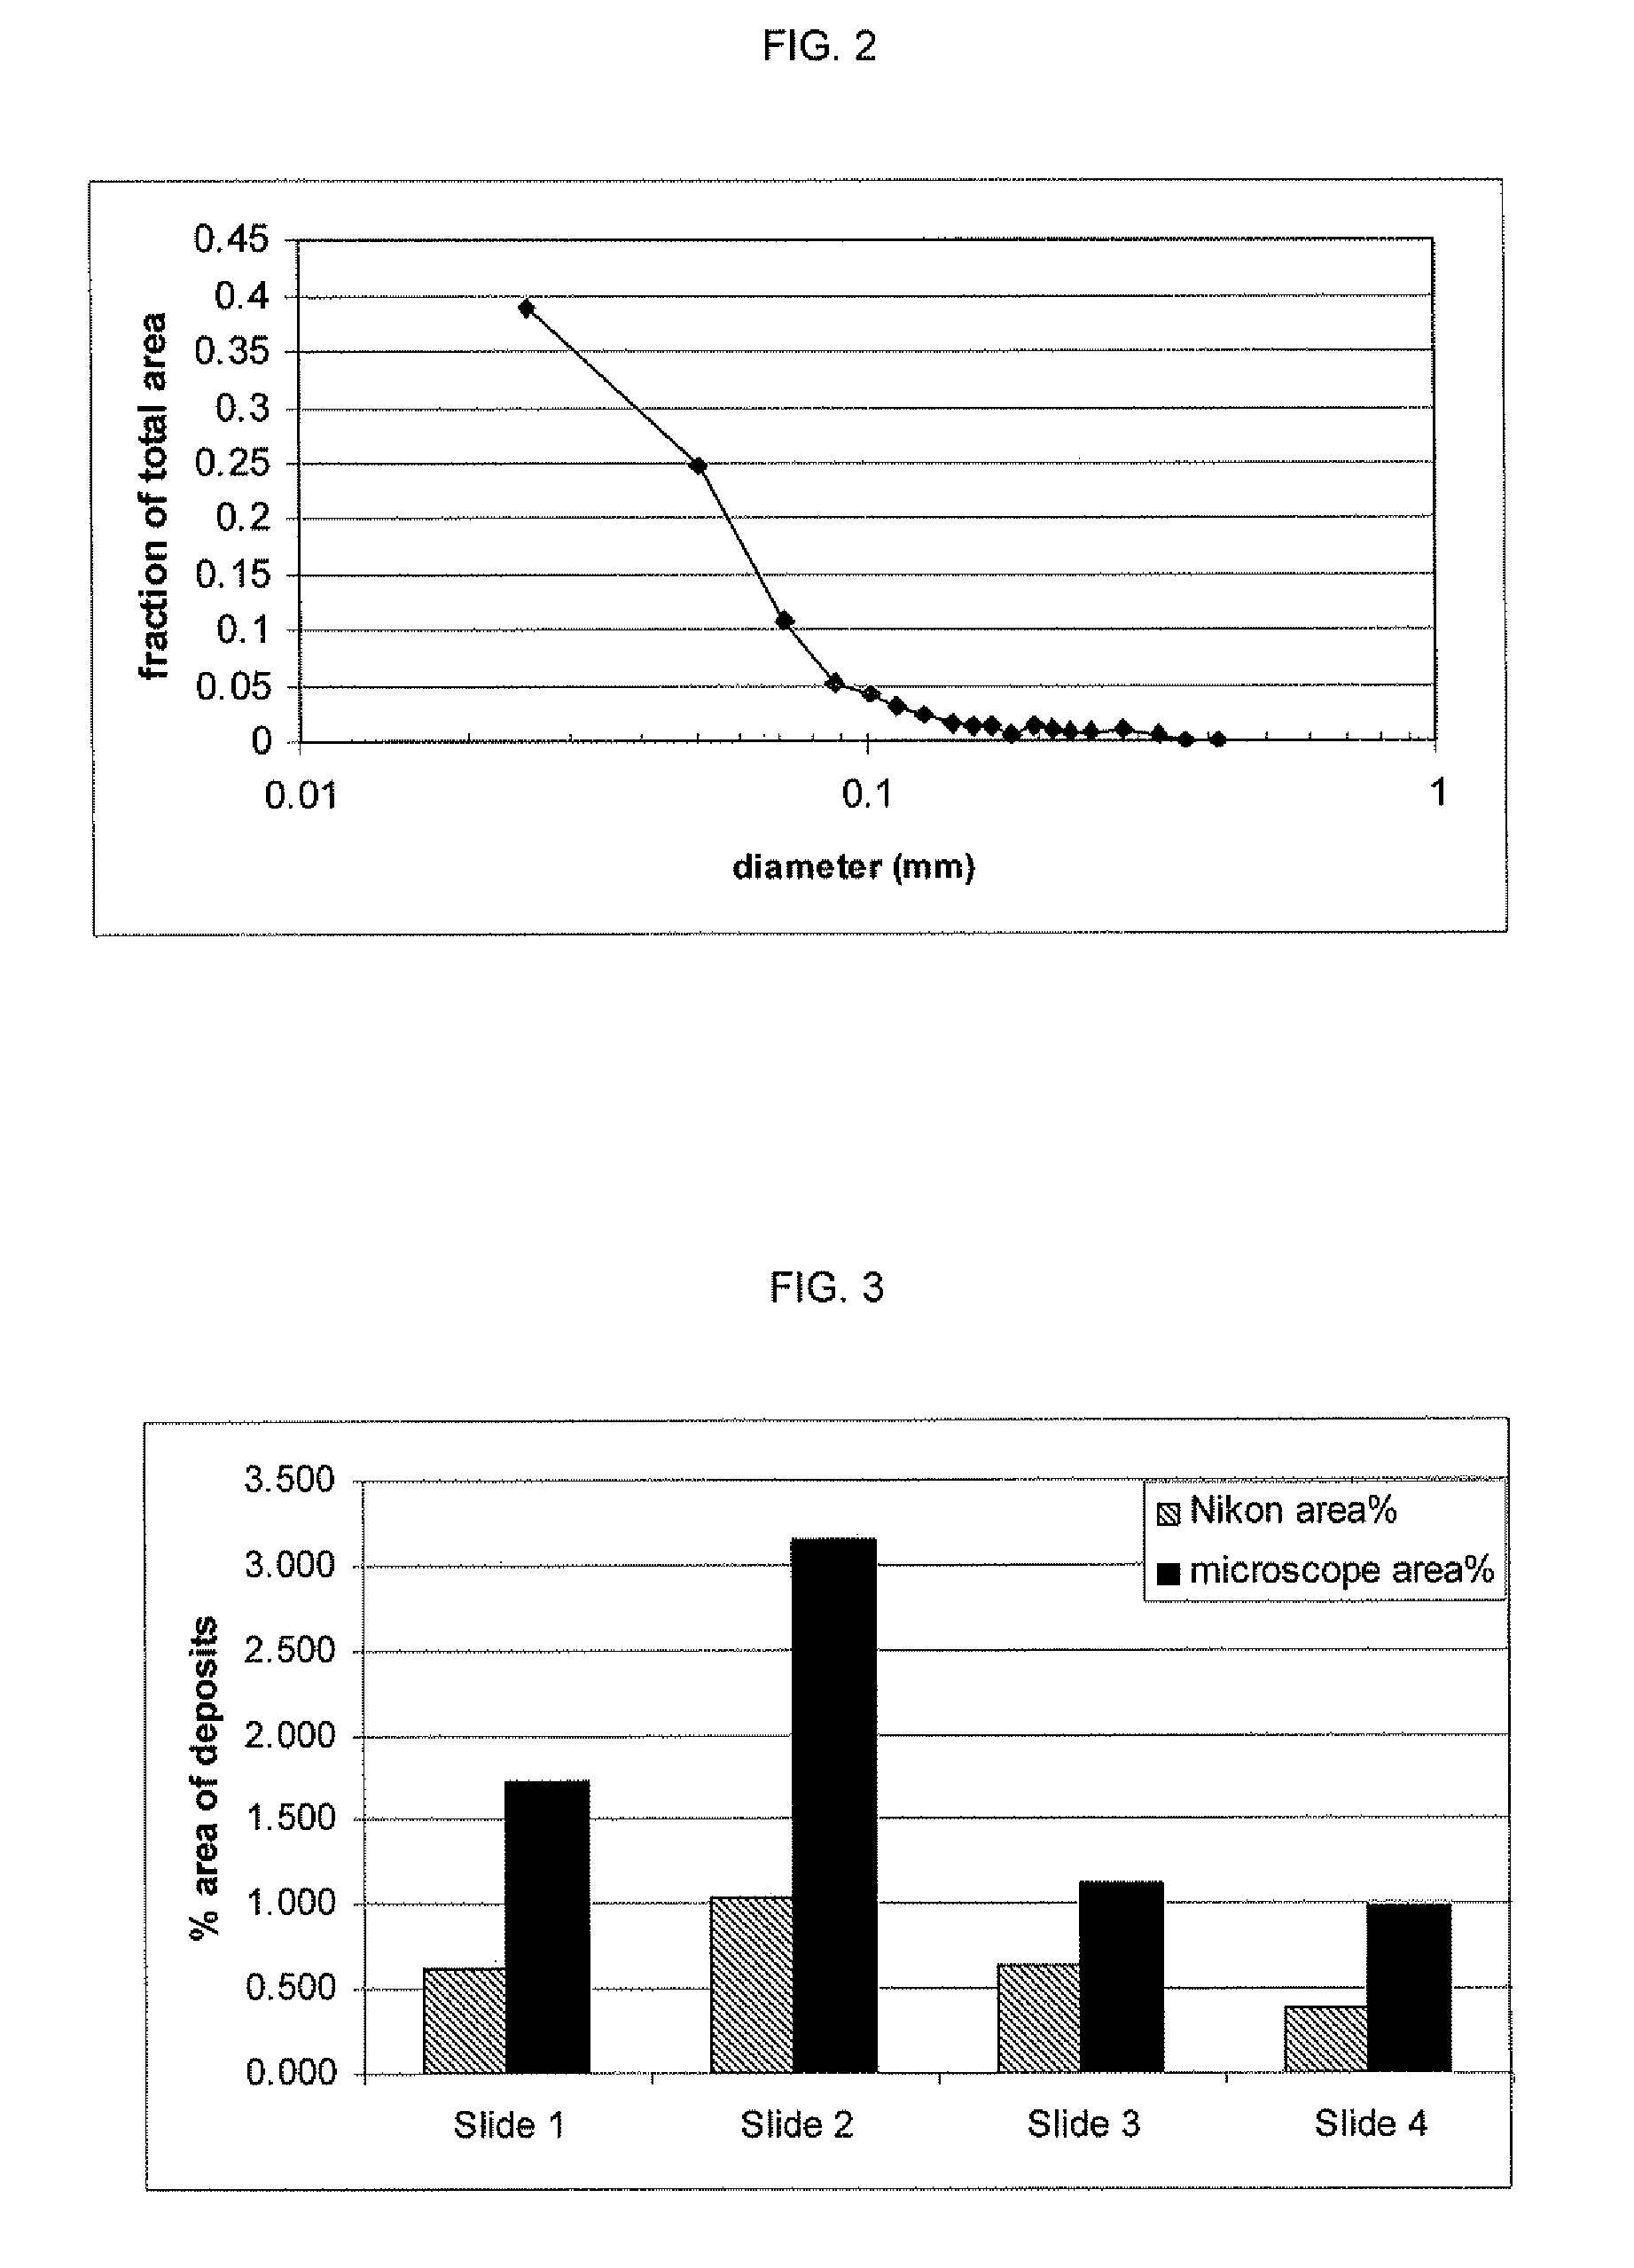 Method and apparatus for measuring deposition of particulate contaminants in pulp and paper slurries